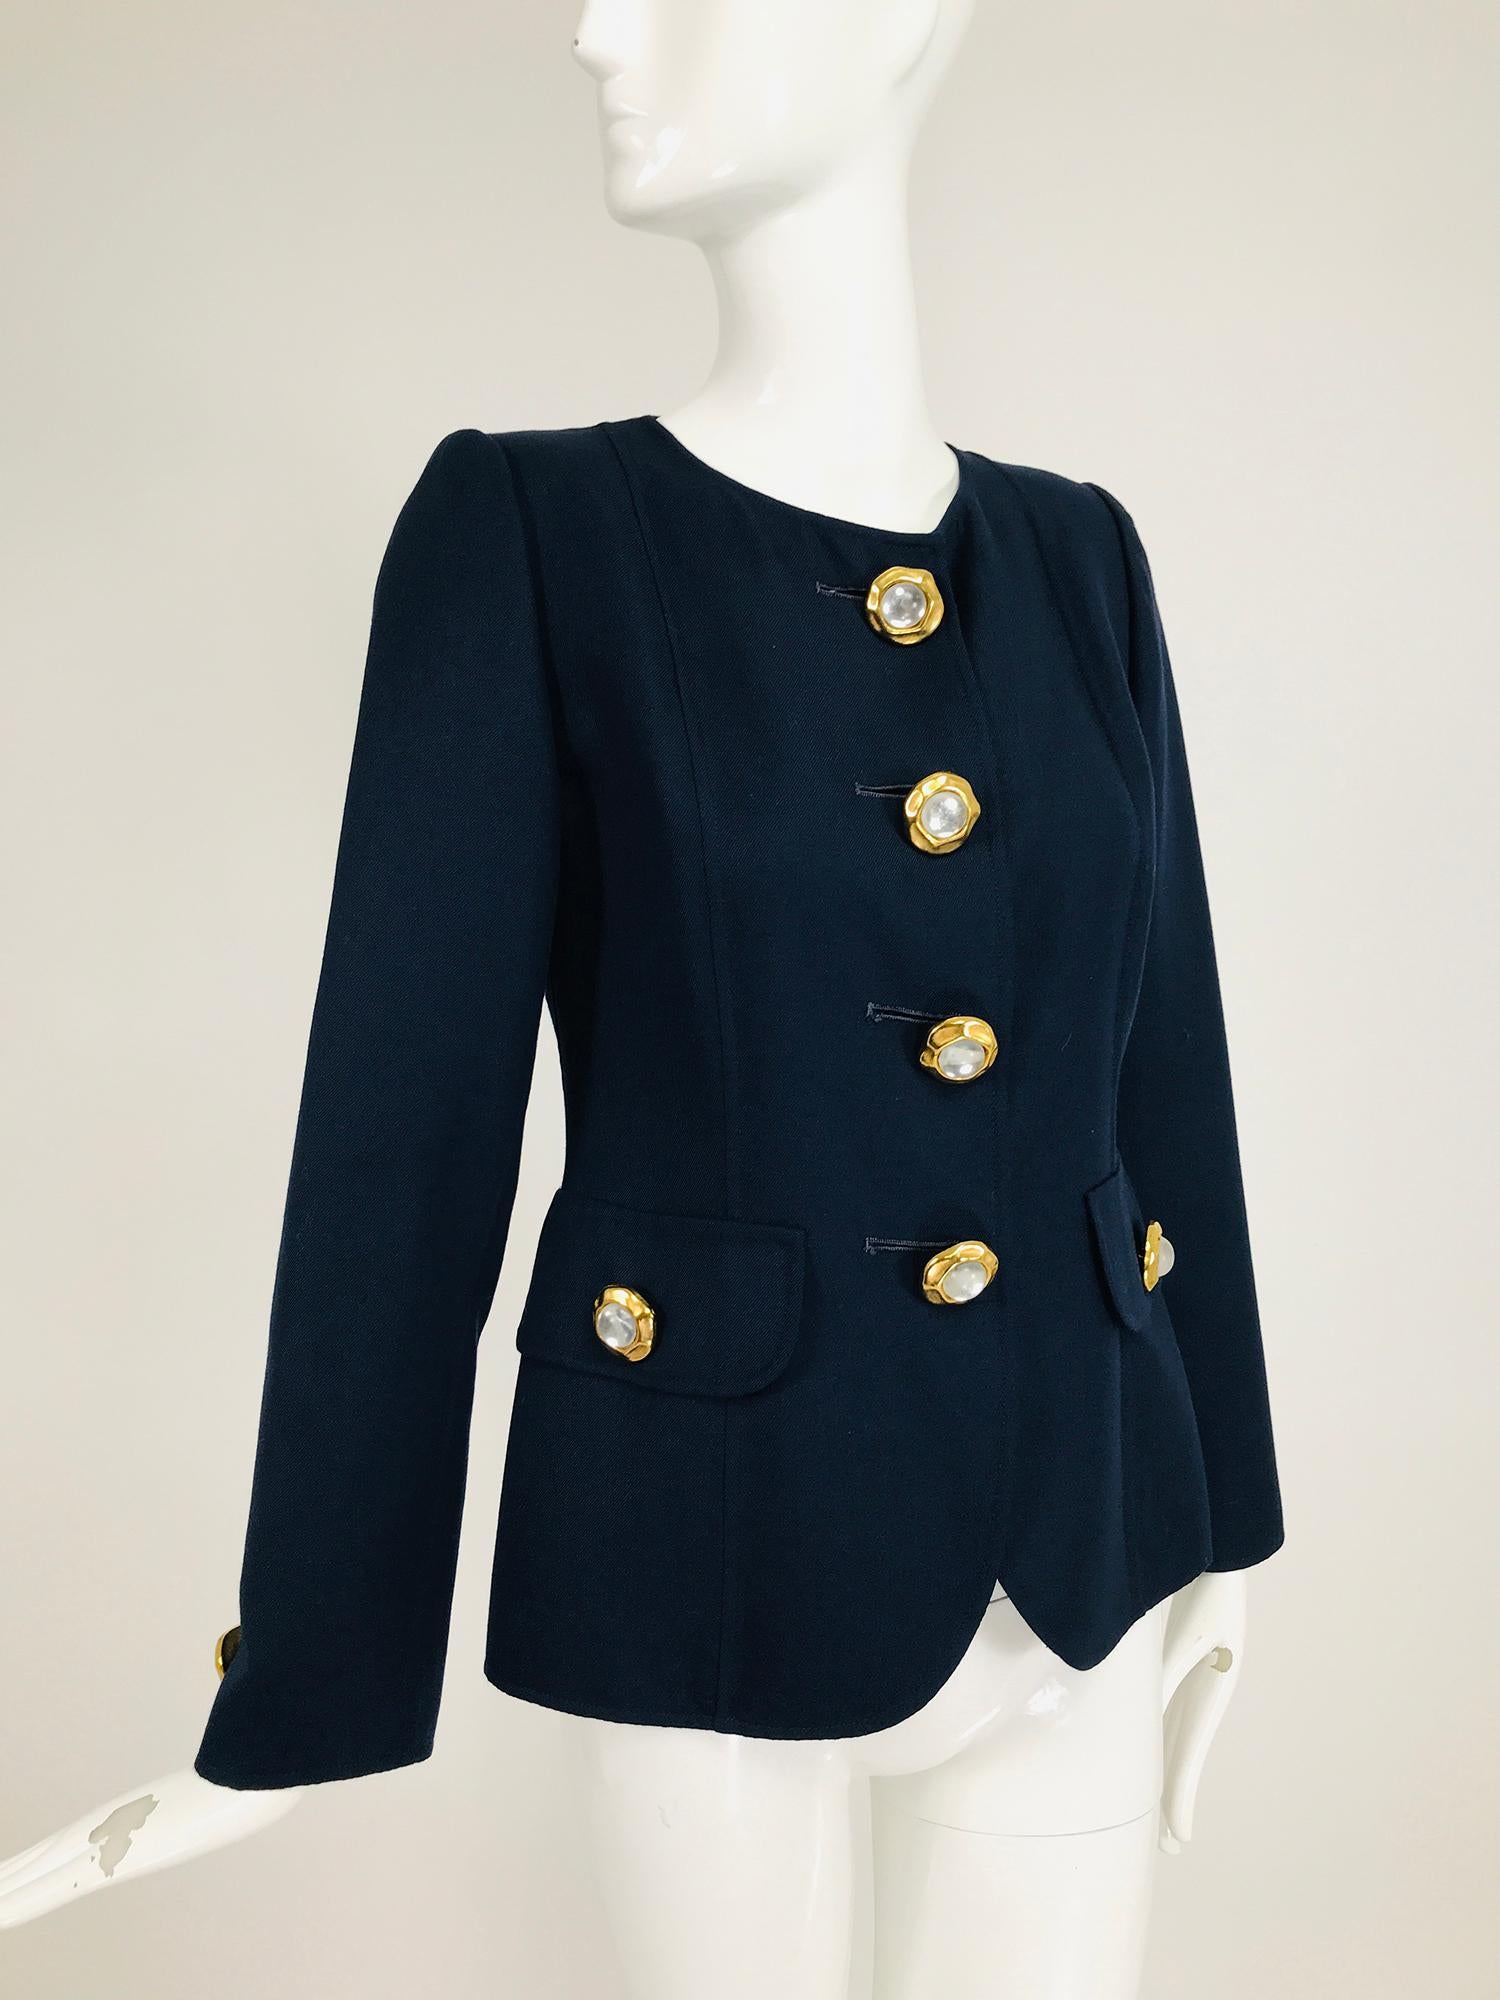 Oscar de la Renta dark navy blue double face wool twill jacket with the most amazing buttons. Jewel neckline, single breasted, princess seam jacket has large matte gold buttons that look handmade, the centers each have a clear round stone center.